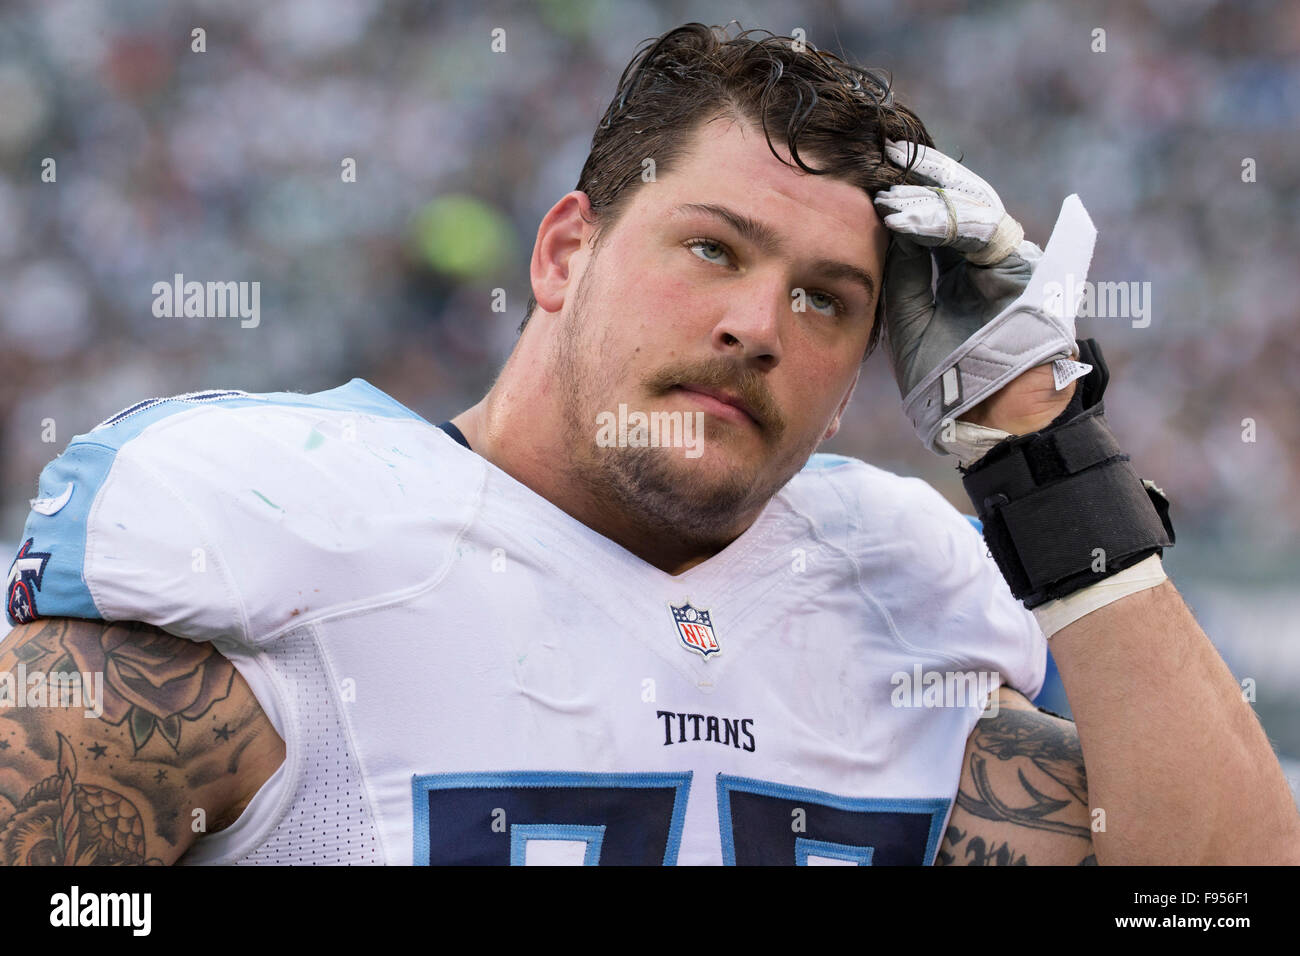 December 13, 2015, Tennessee Titans tackle Taylor Lewan (77) looks on  during the NFL game between the Tennessee Titans and the New York Jets at  MetLife Stadium in East Rutherford, New Jersey.